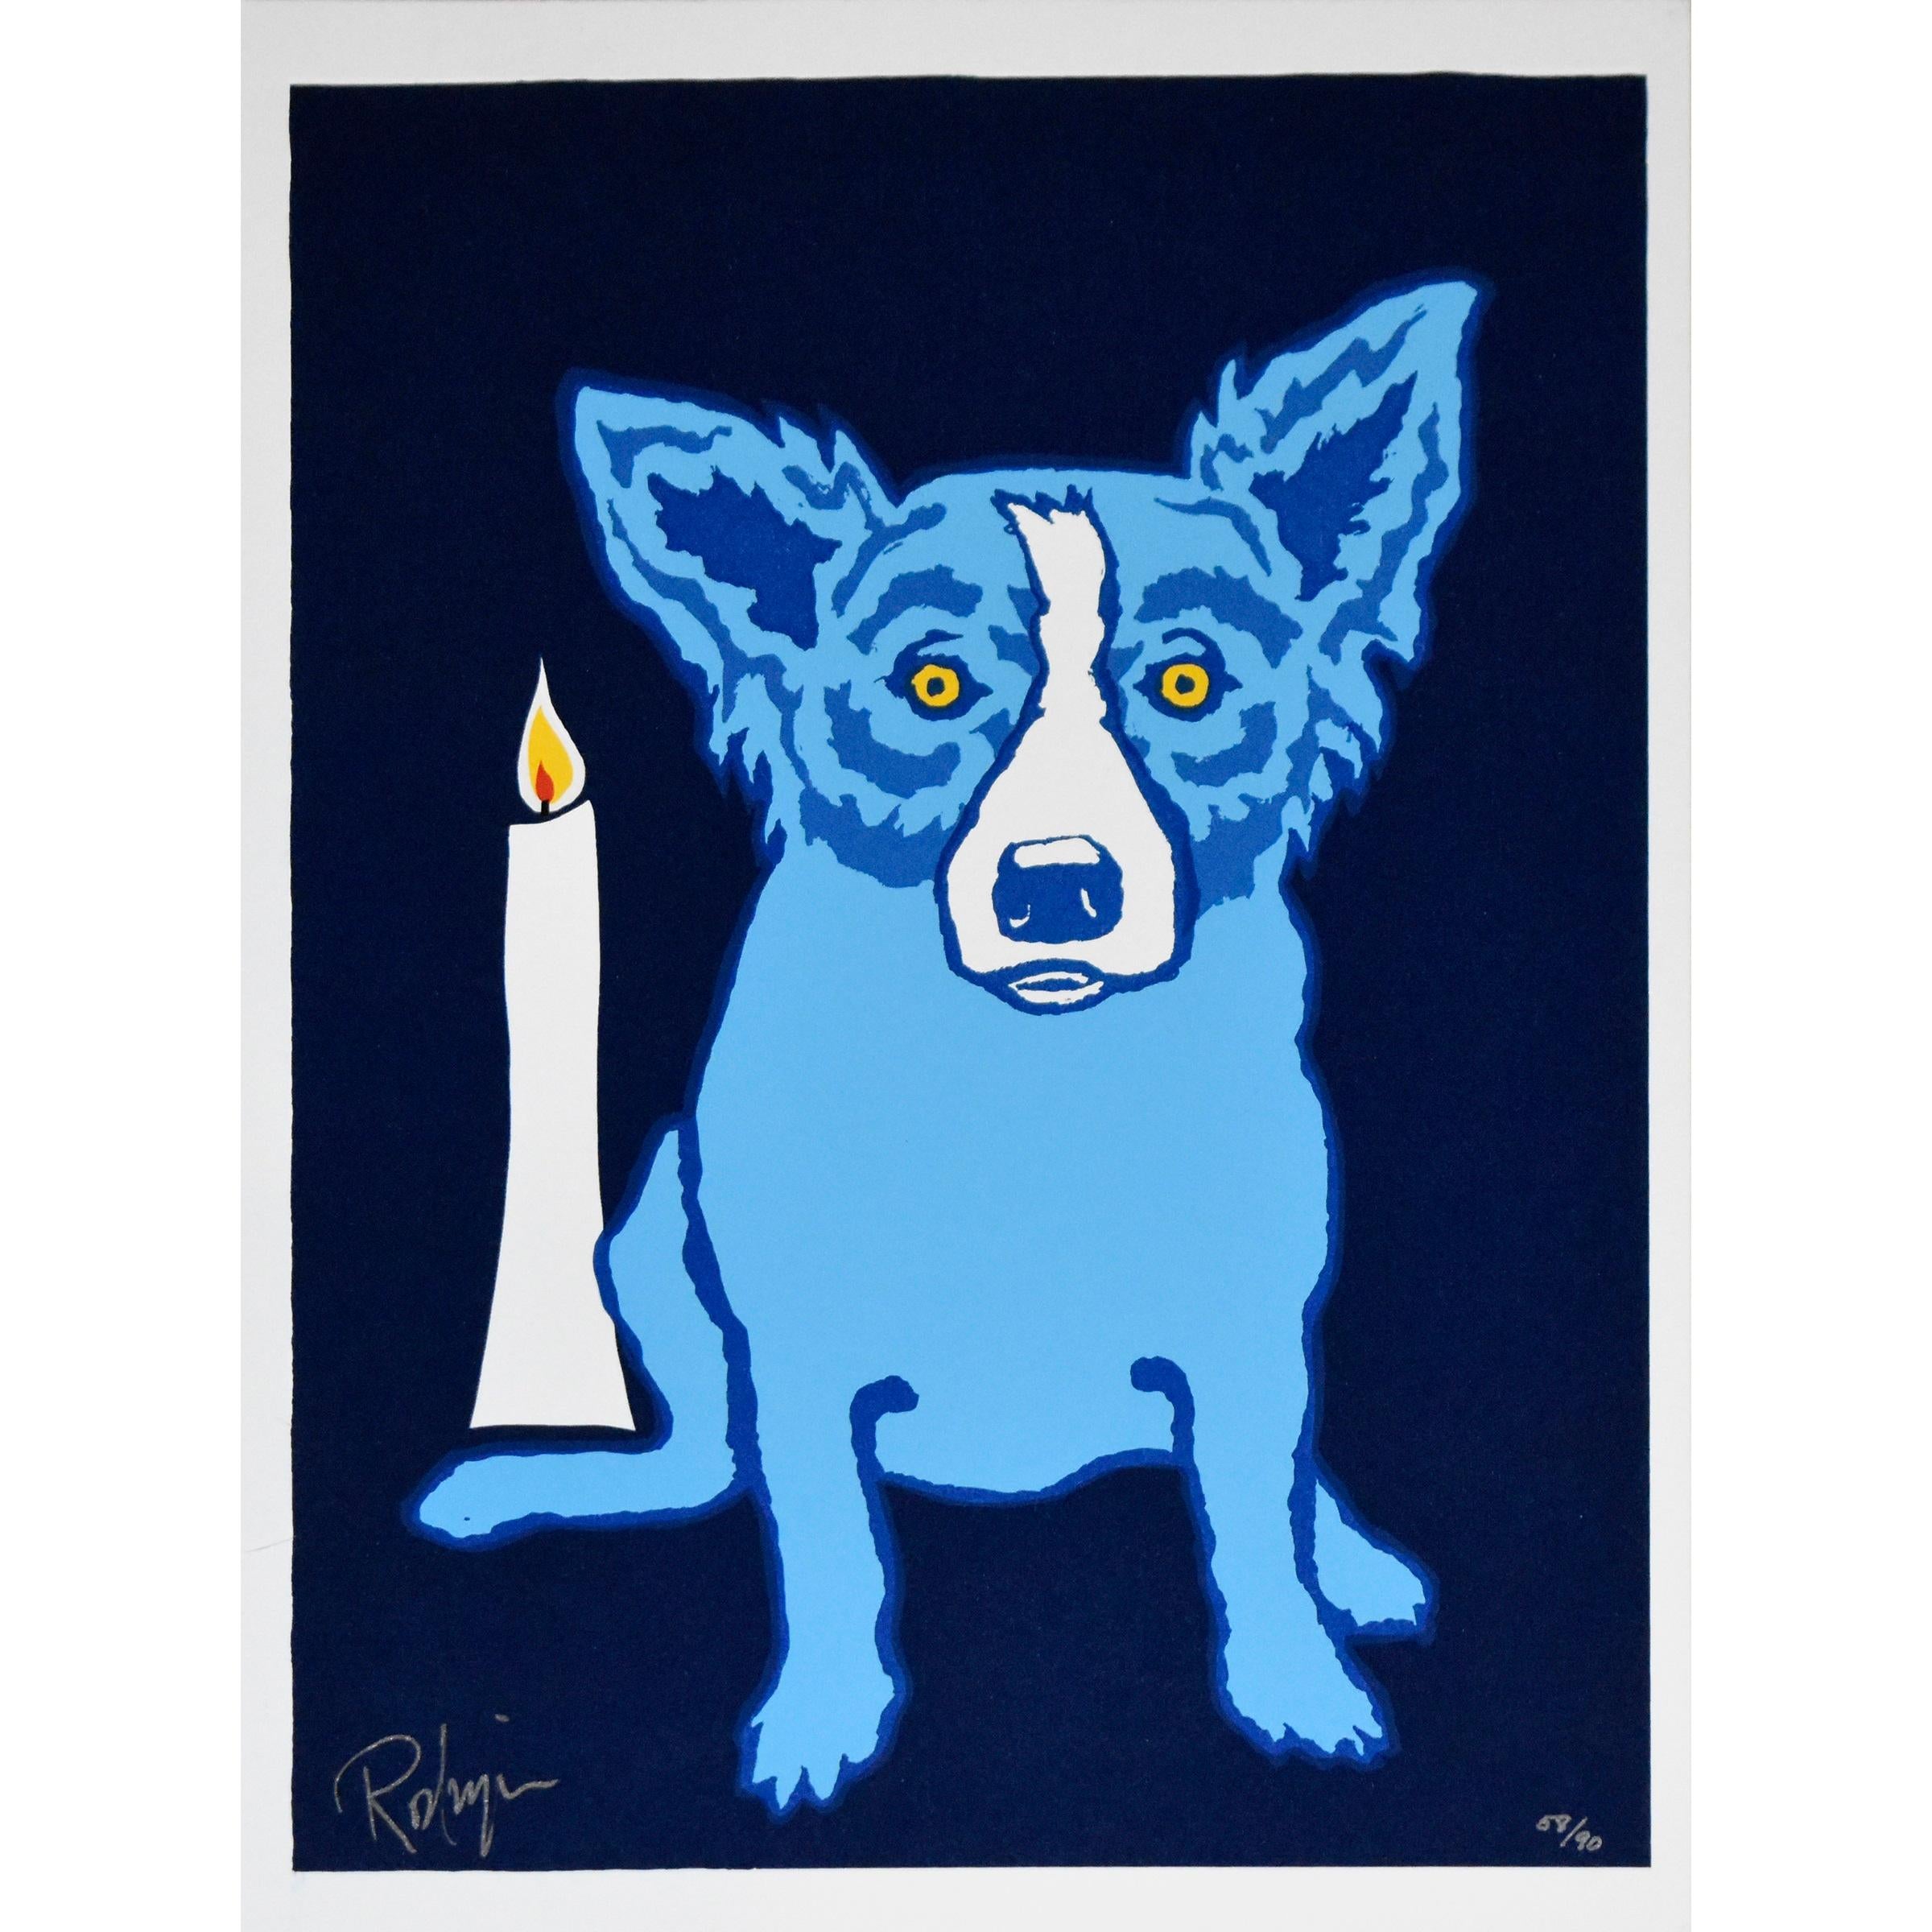 Animal Print George Rodrigue - A Flame in My Heart for You - Sérigraphie de chien bleu